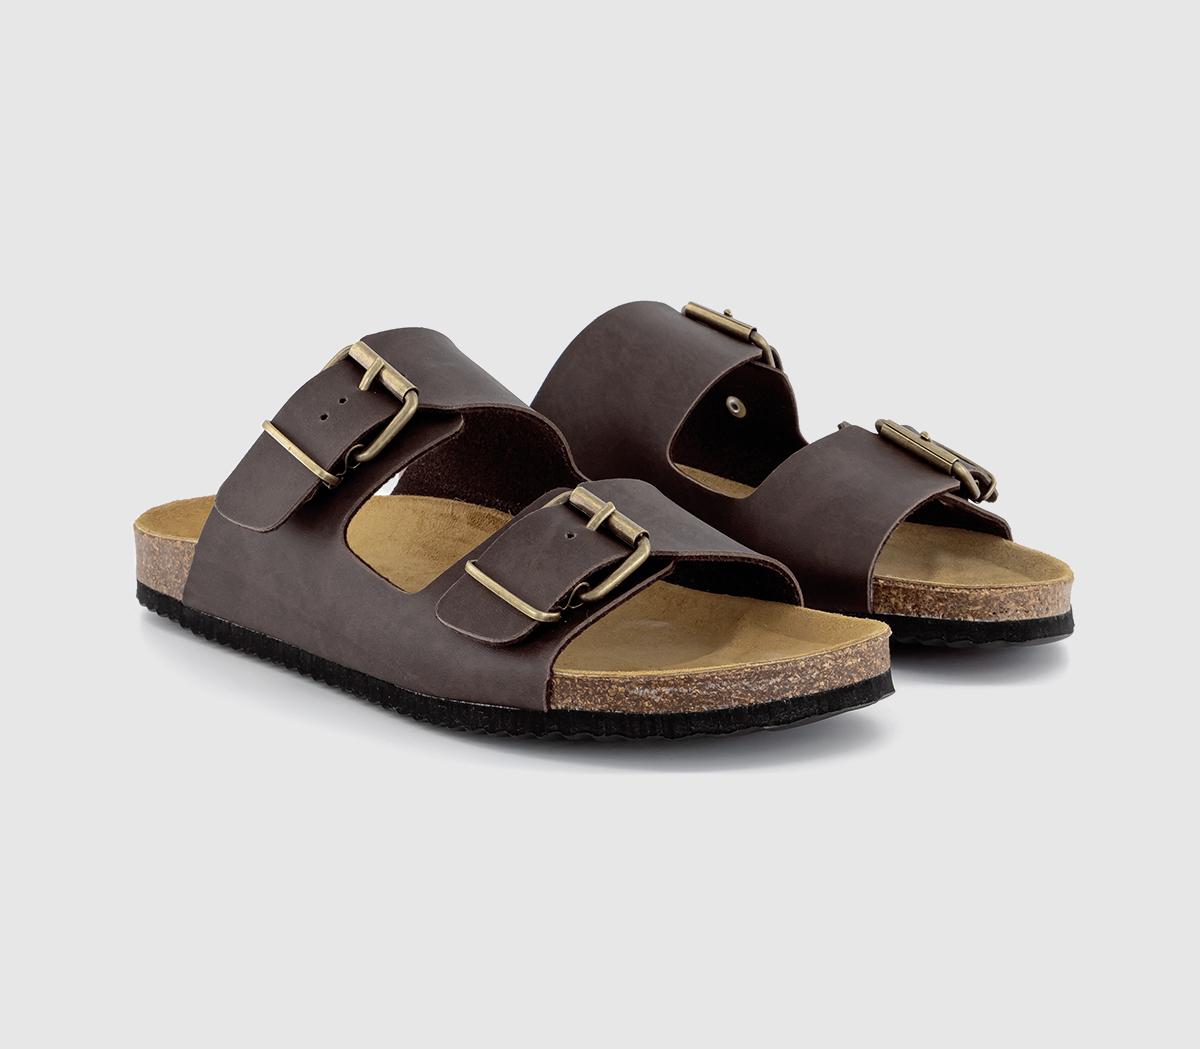 OFFICE Mens Livingstone Double Strap Footbeds Sandals Brown, 11